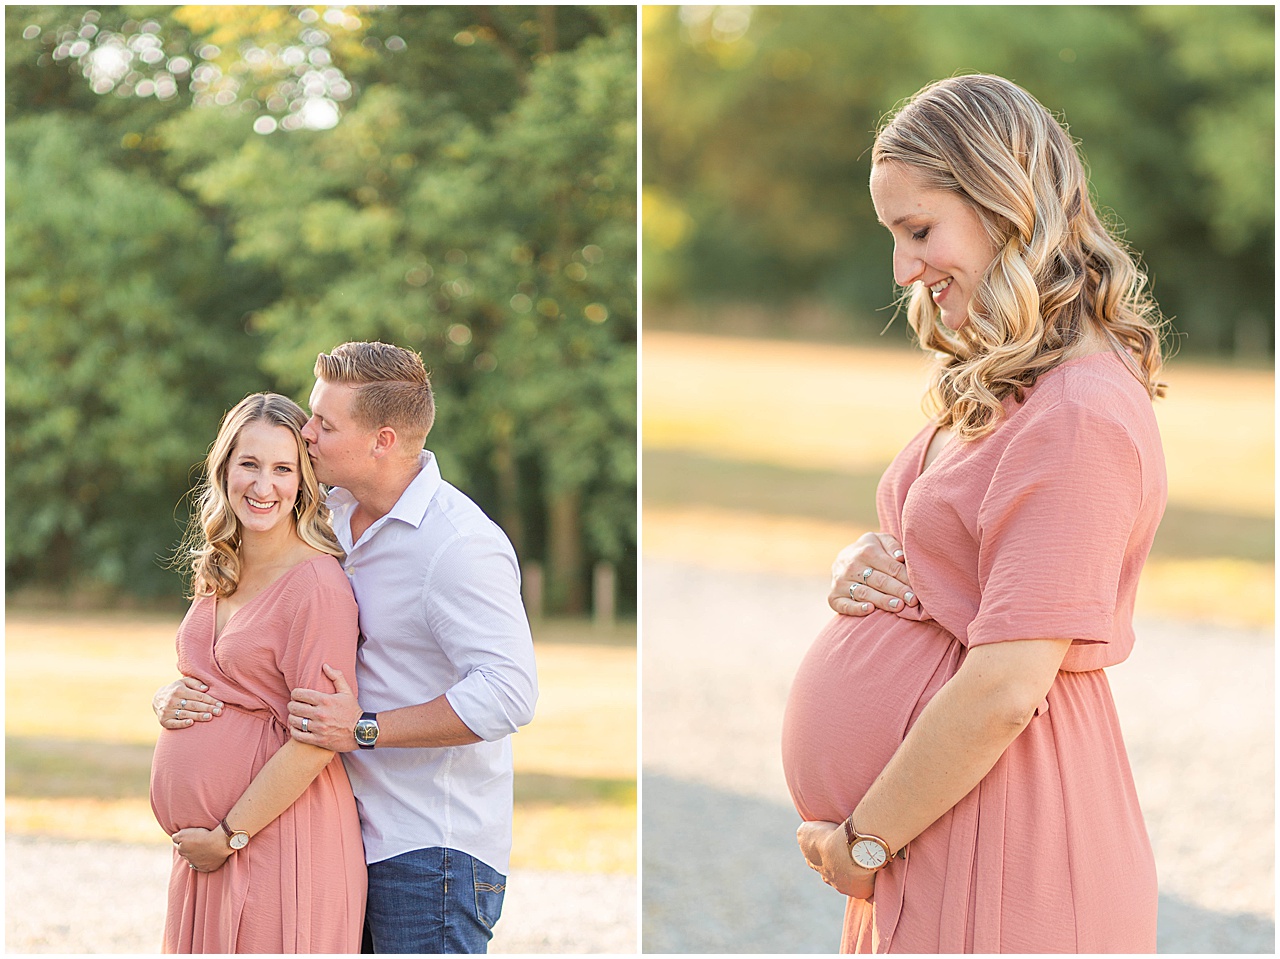 Don't know what to wear for your maternity photoshoot? Check out